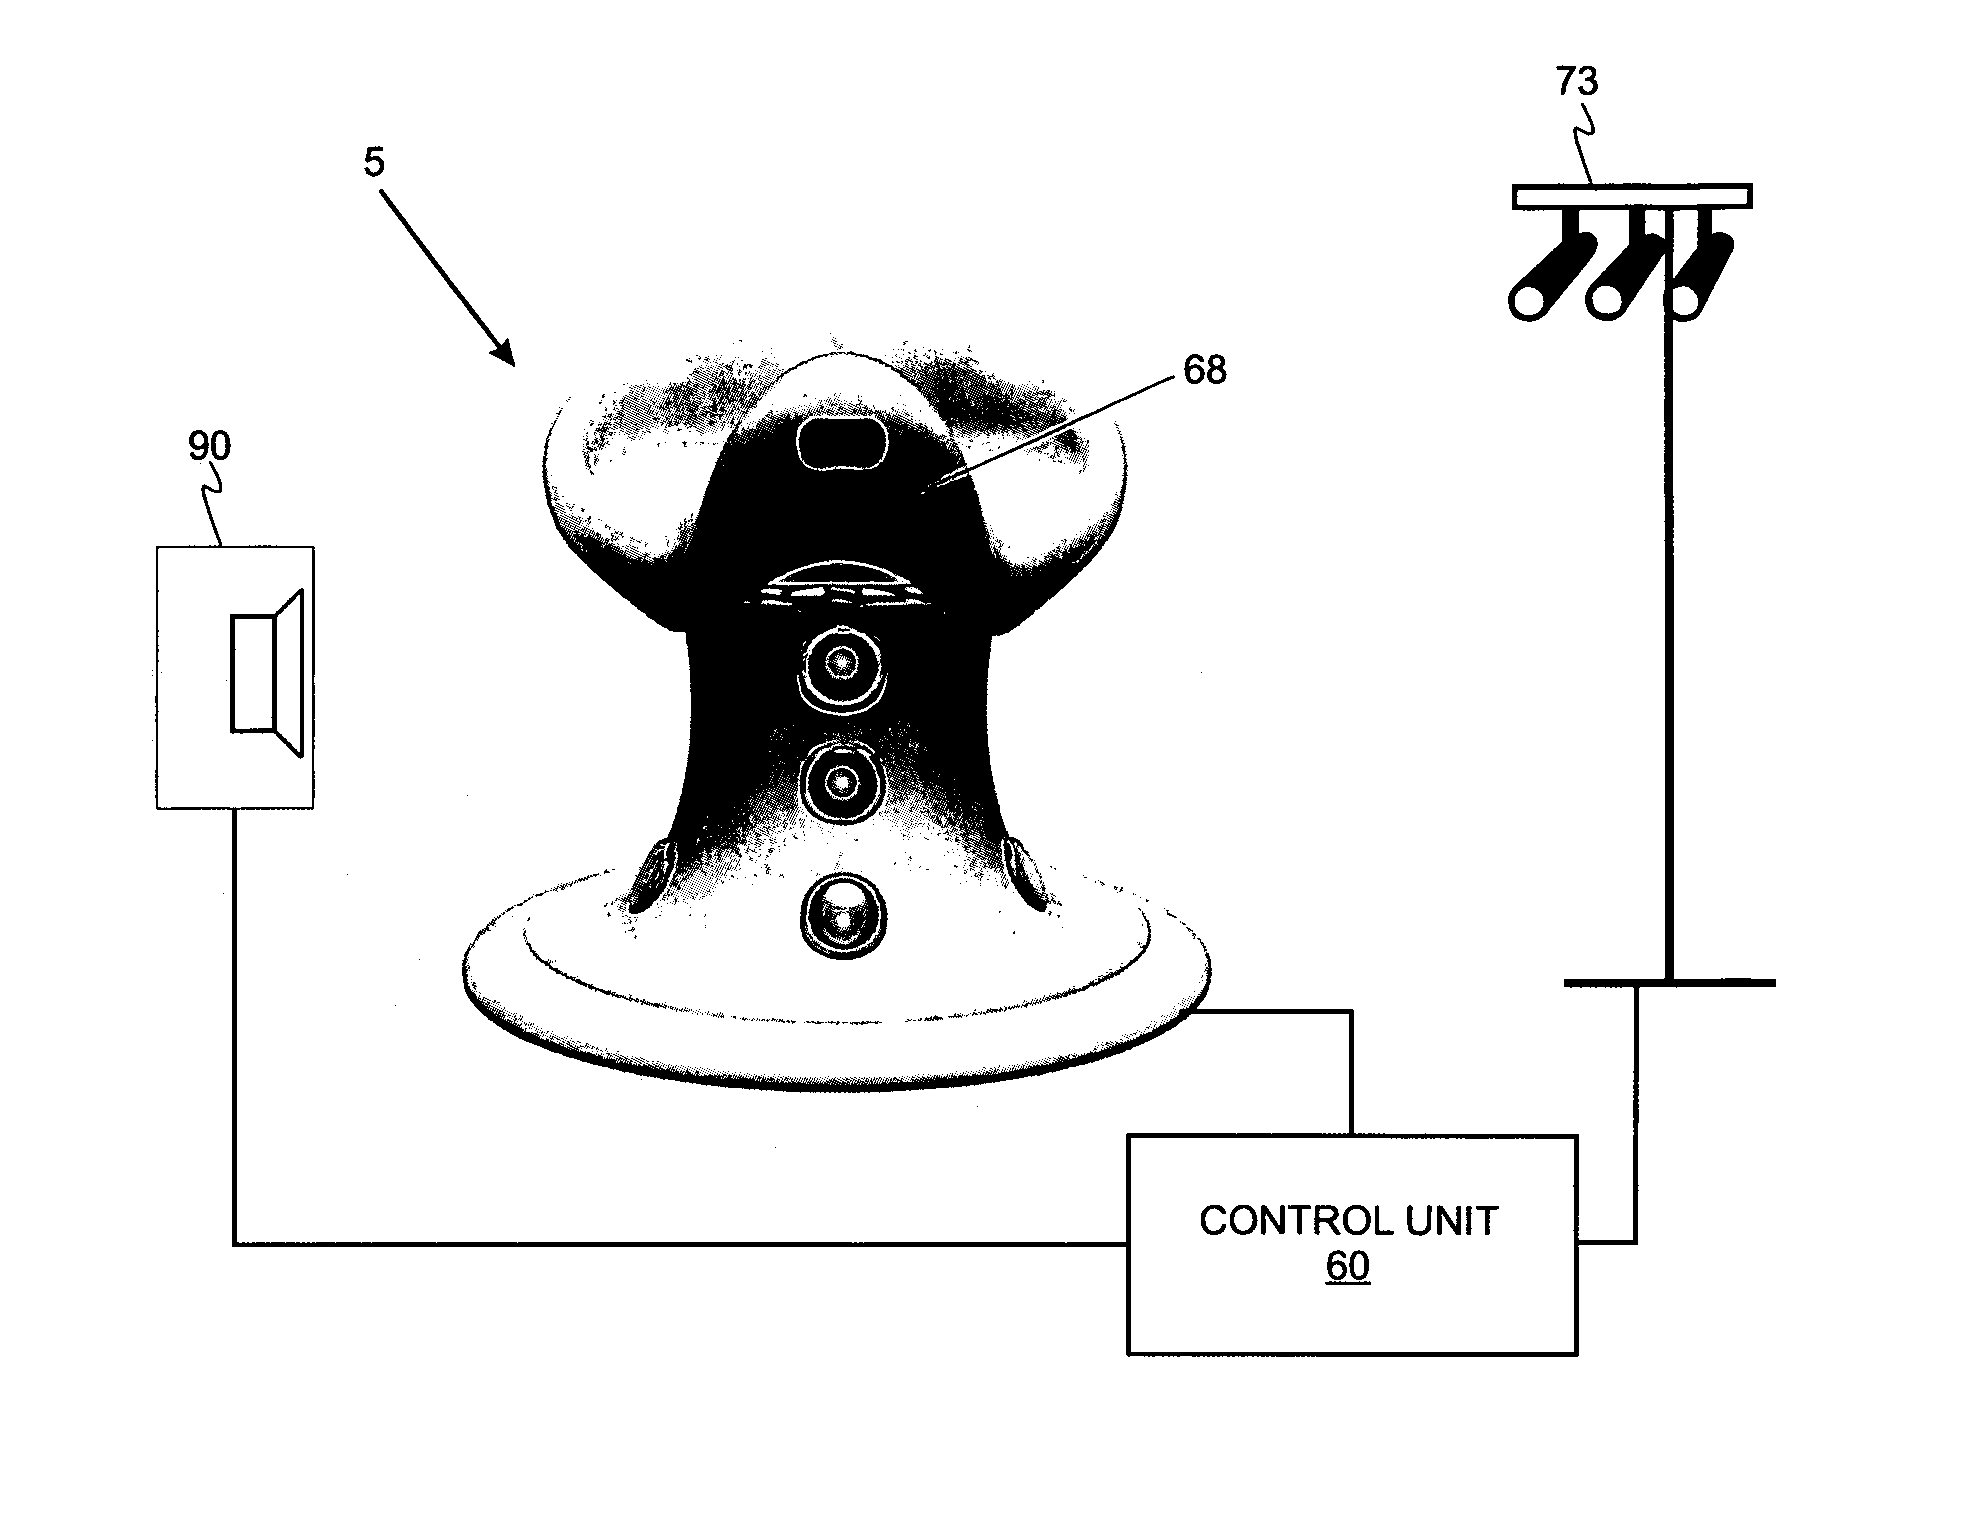 Entertainment apparatus for a seated user